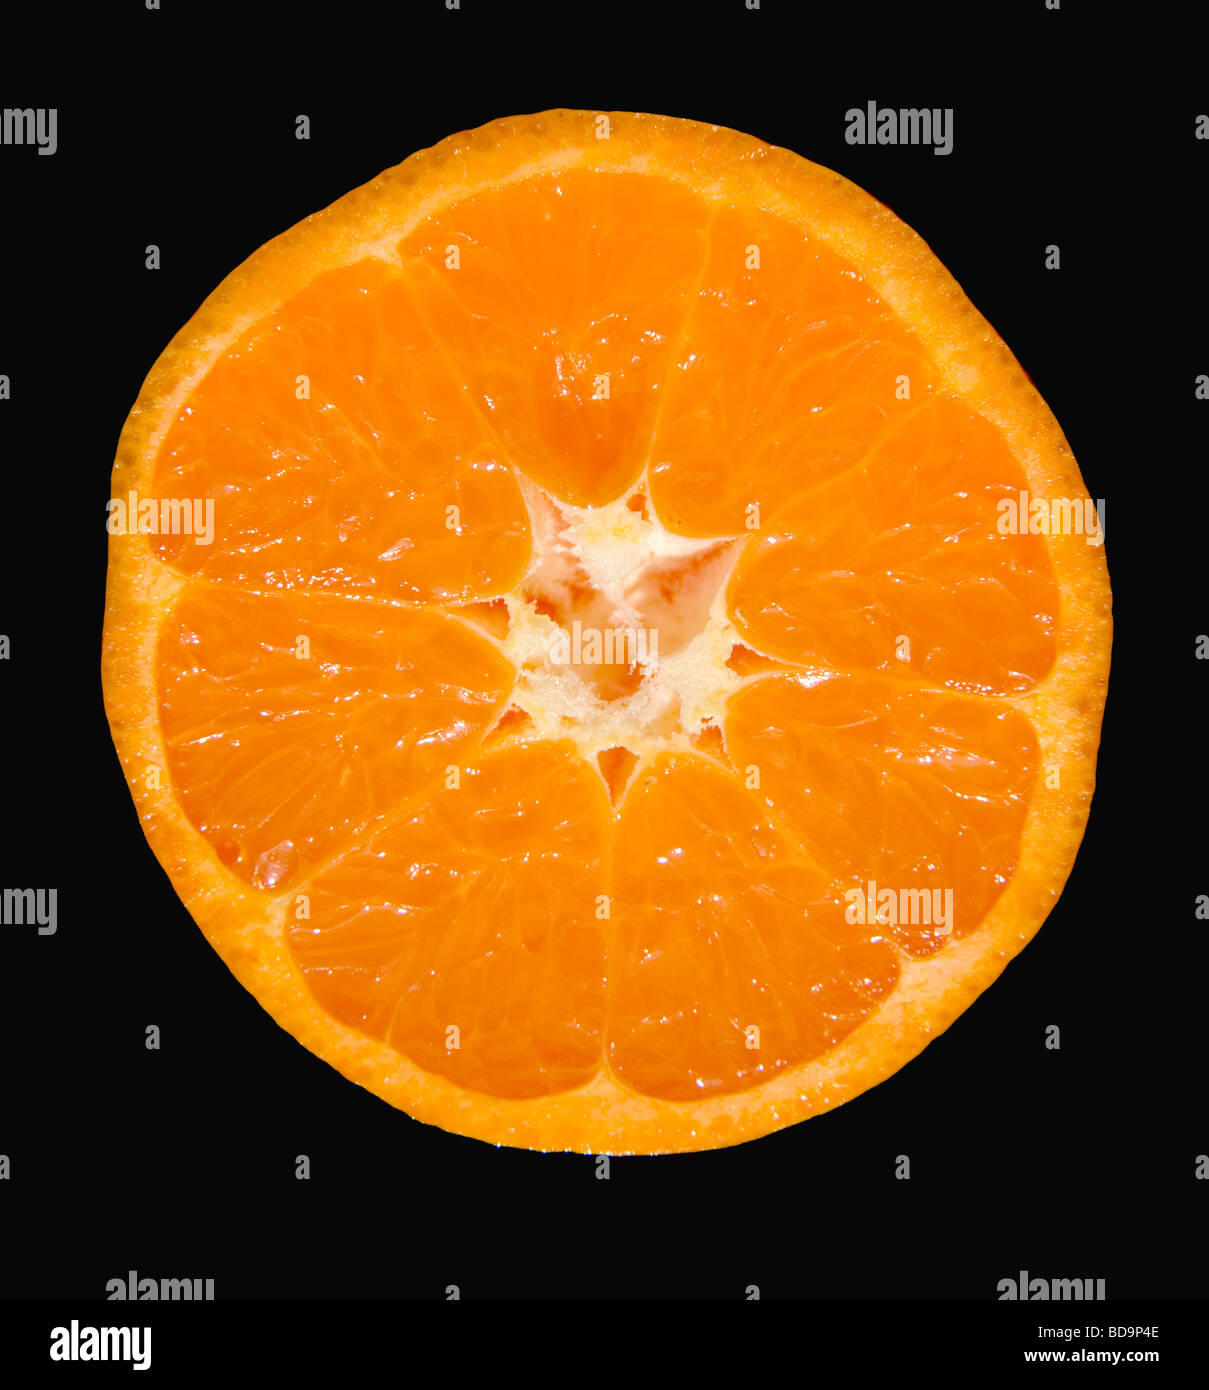 detailed view of a section view through an orange cut in half on a black background Stock Photo